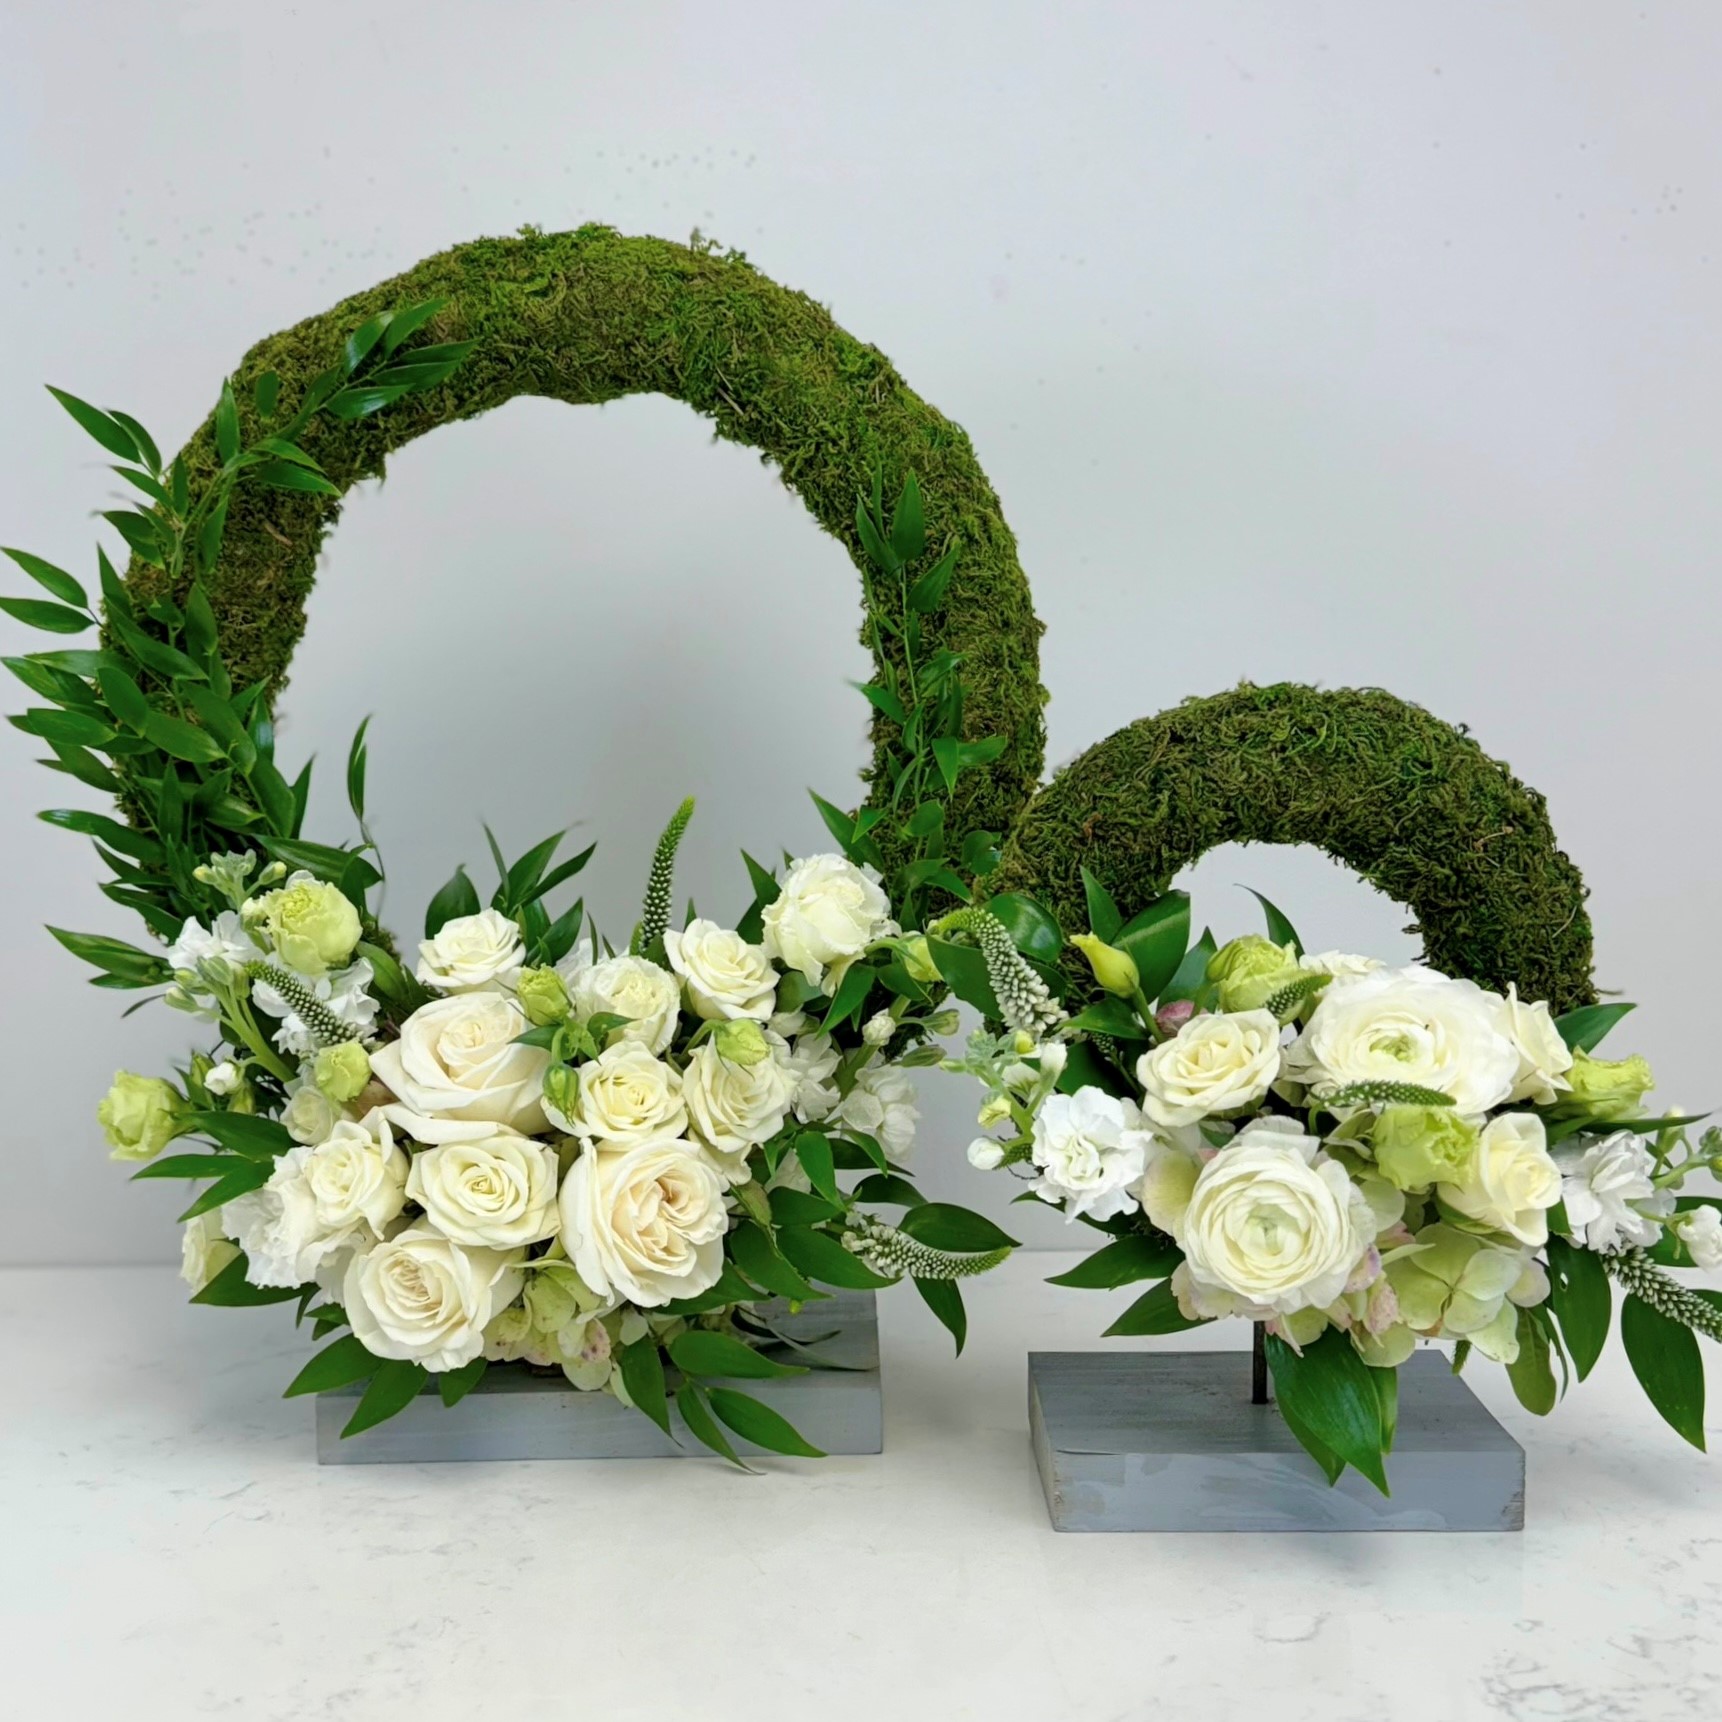 Moss Wreaths on Stand